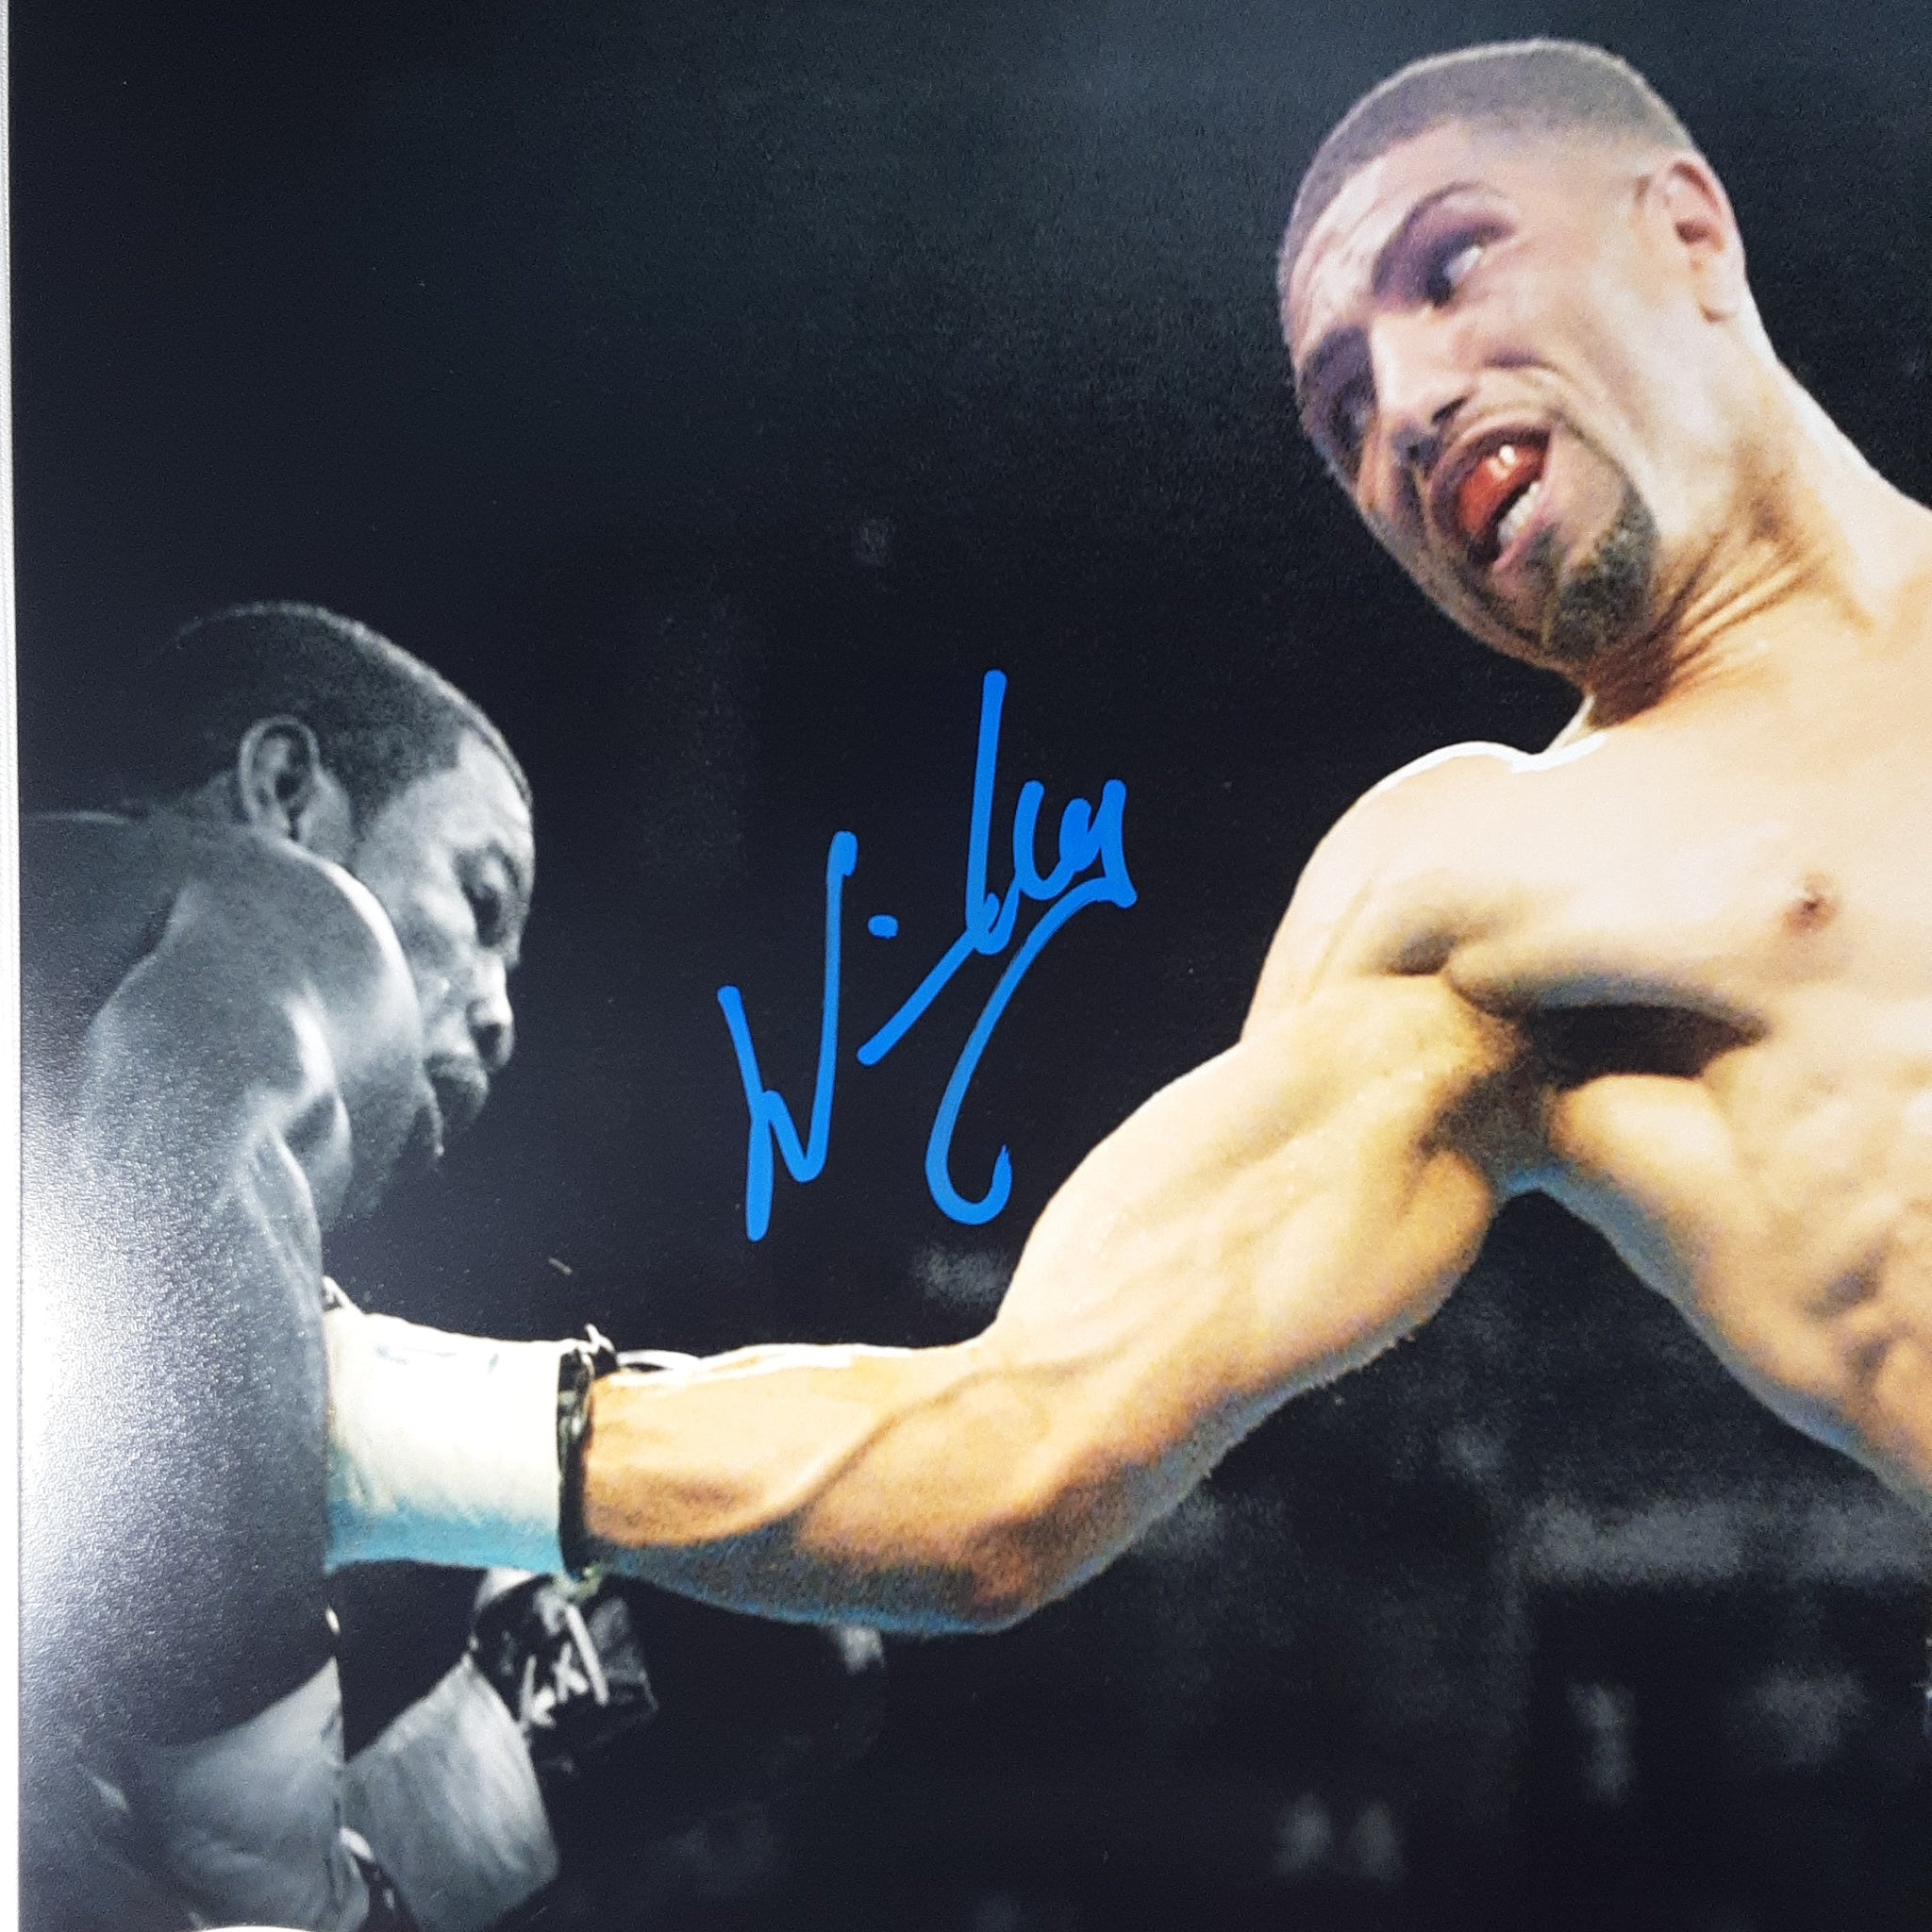 Winky Wright Authentic Signed 8x10 Photo Autographed JSA.